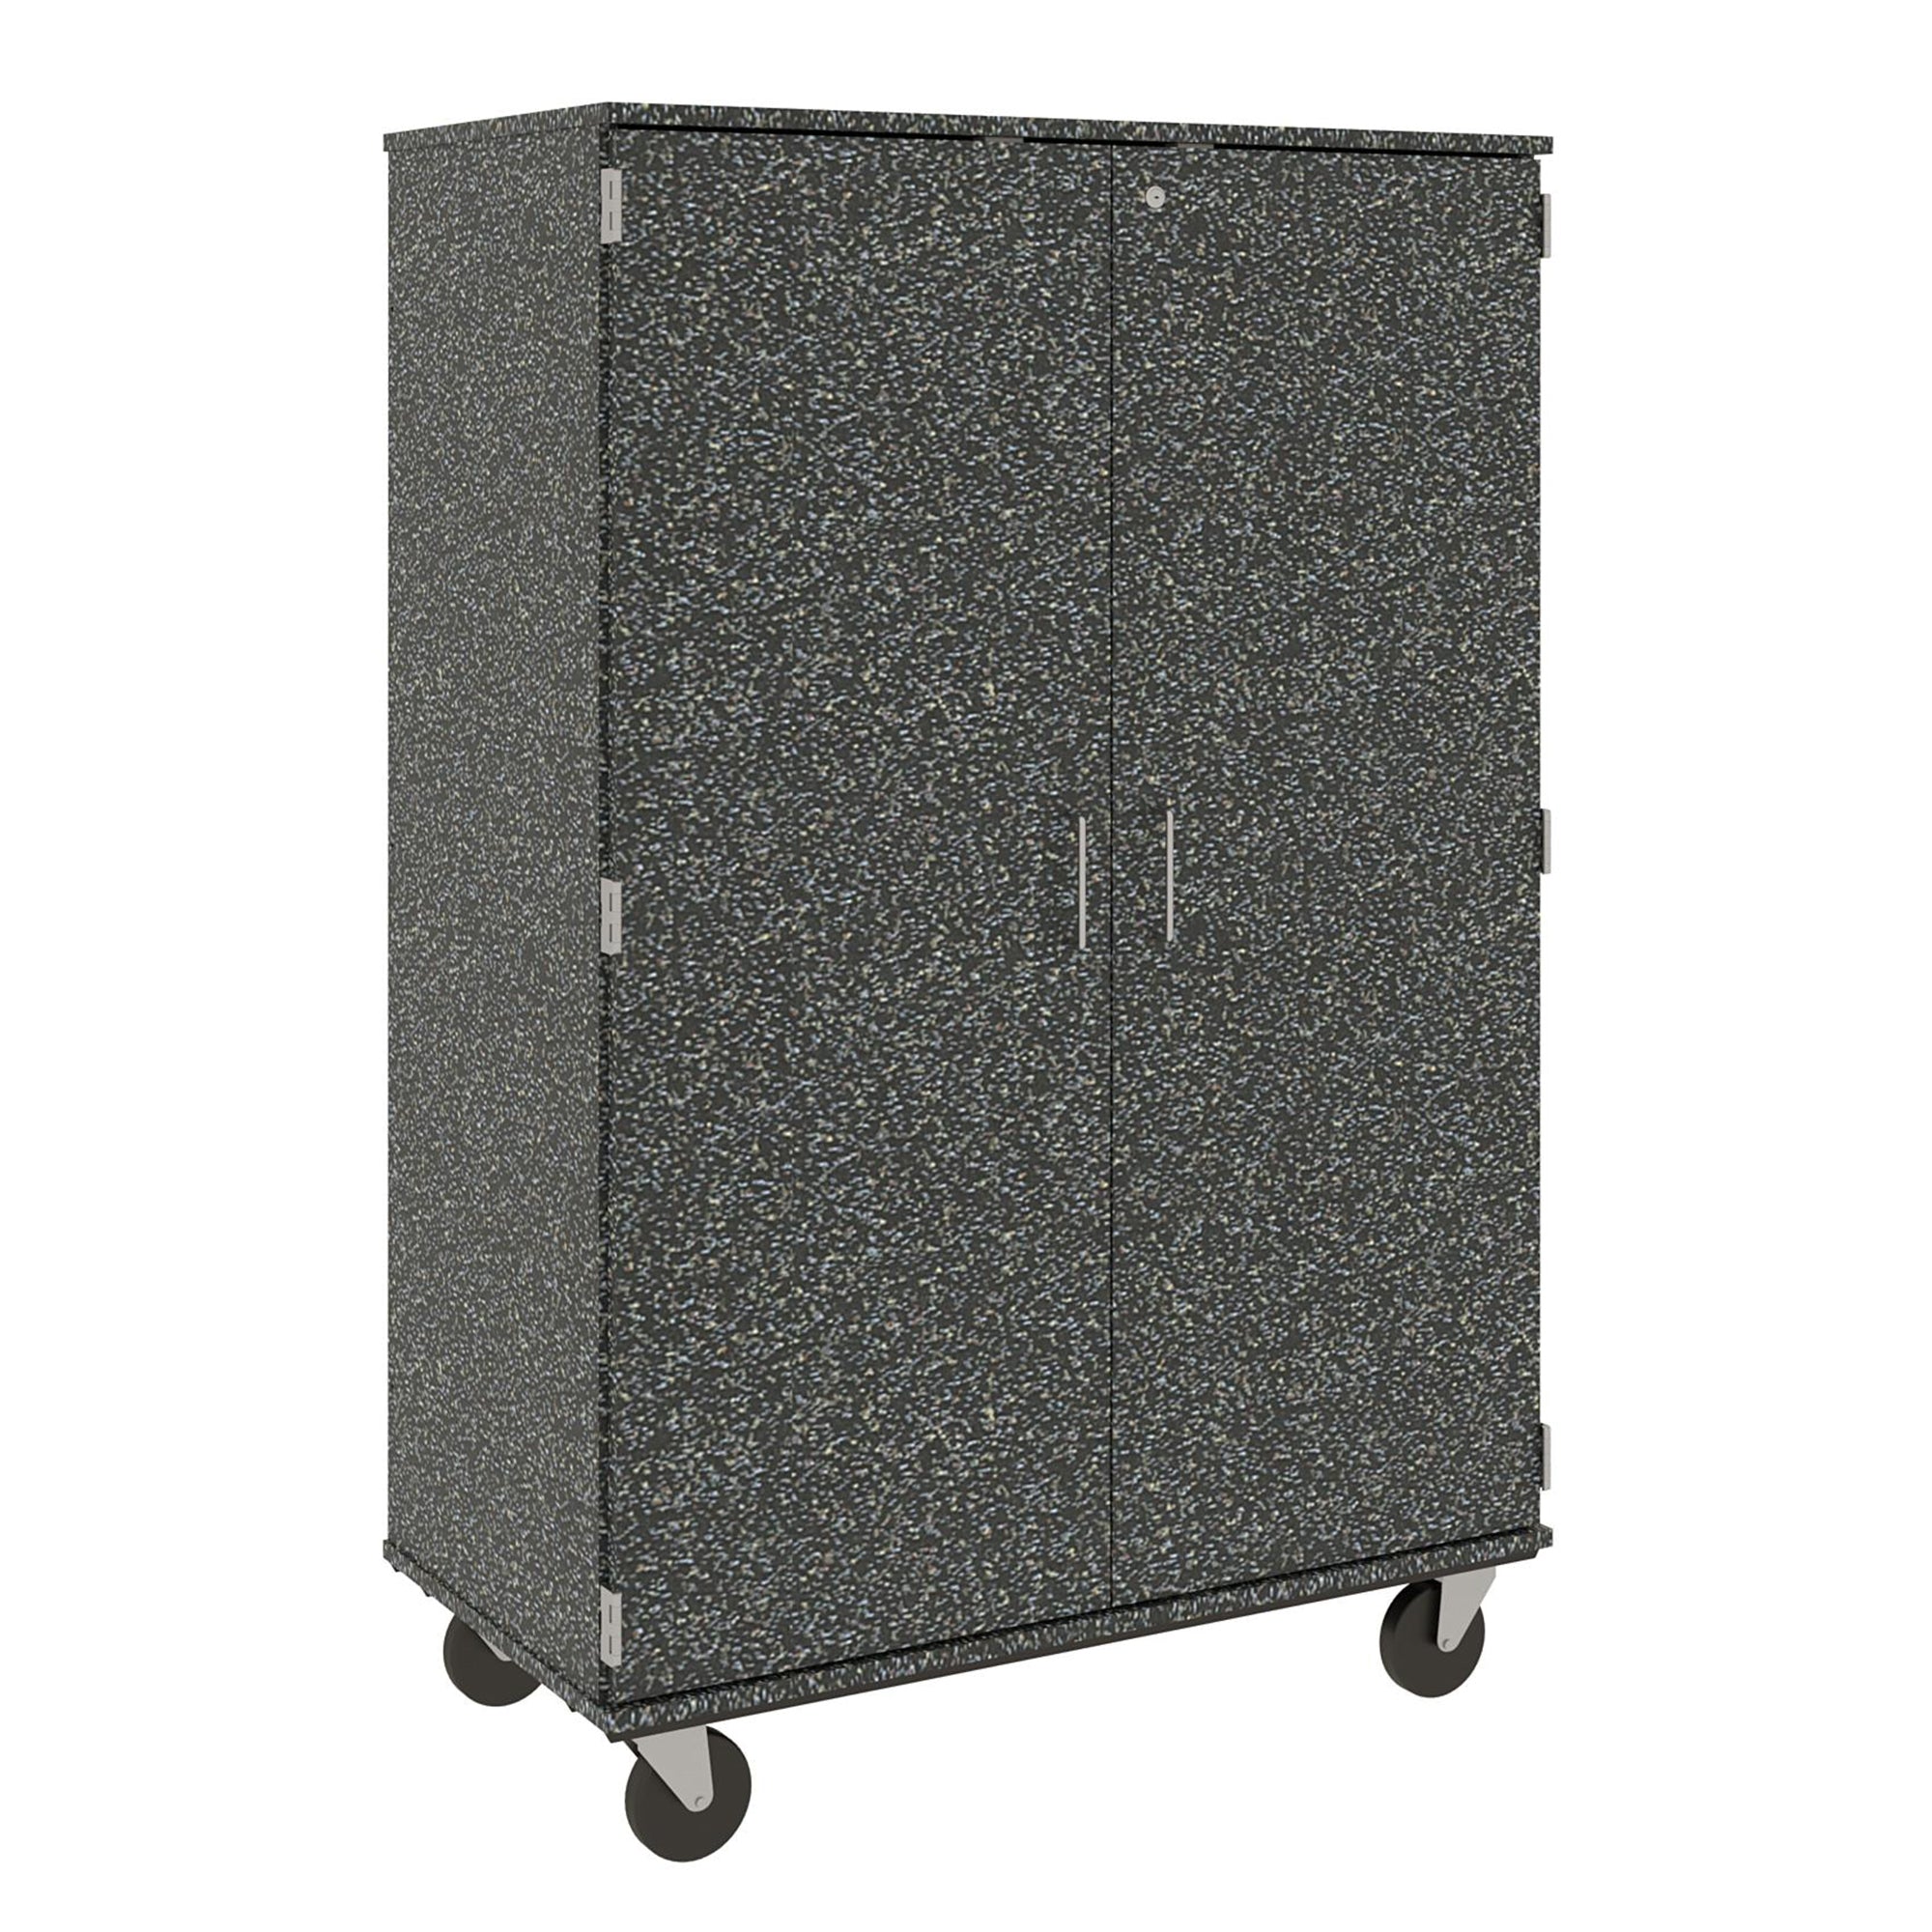 67" Tall Assembled Mobile Bin Storage Cabinet with 18 6" Bins - 80249 F67